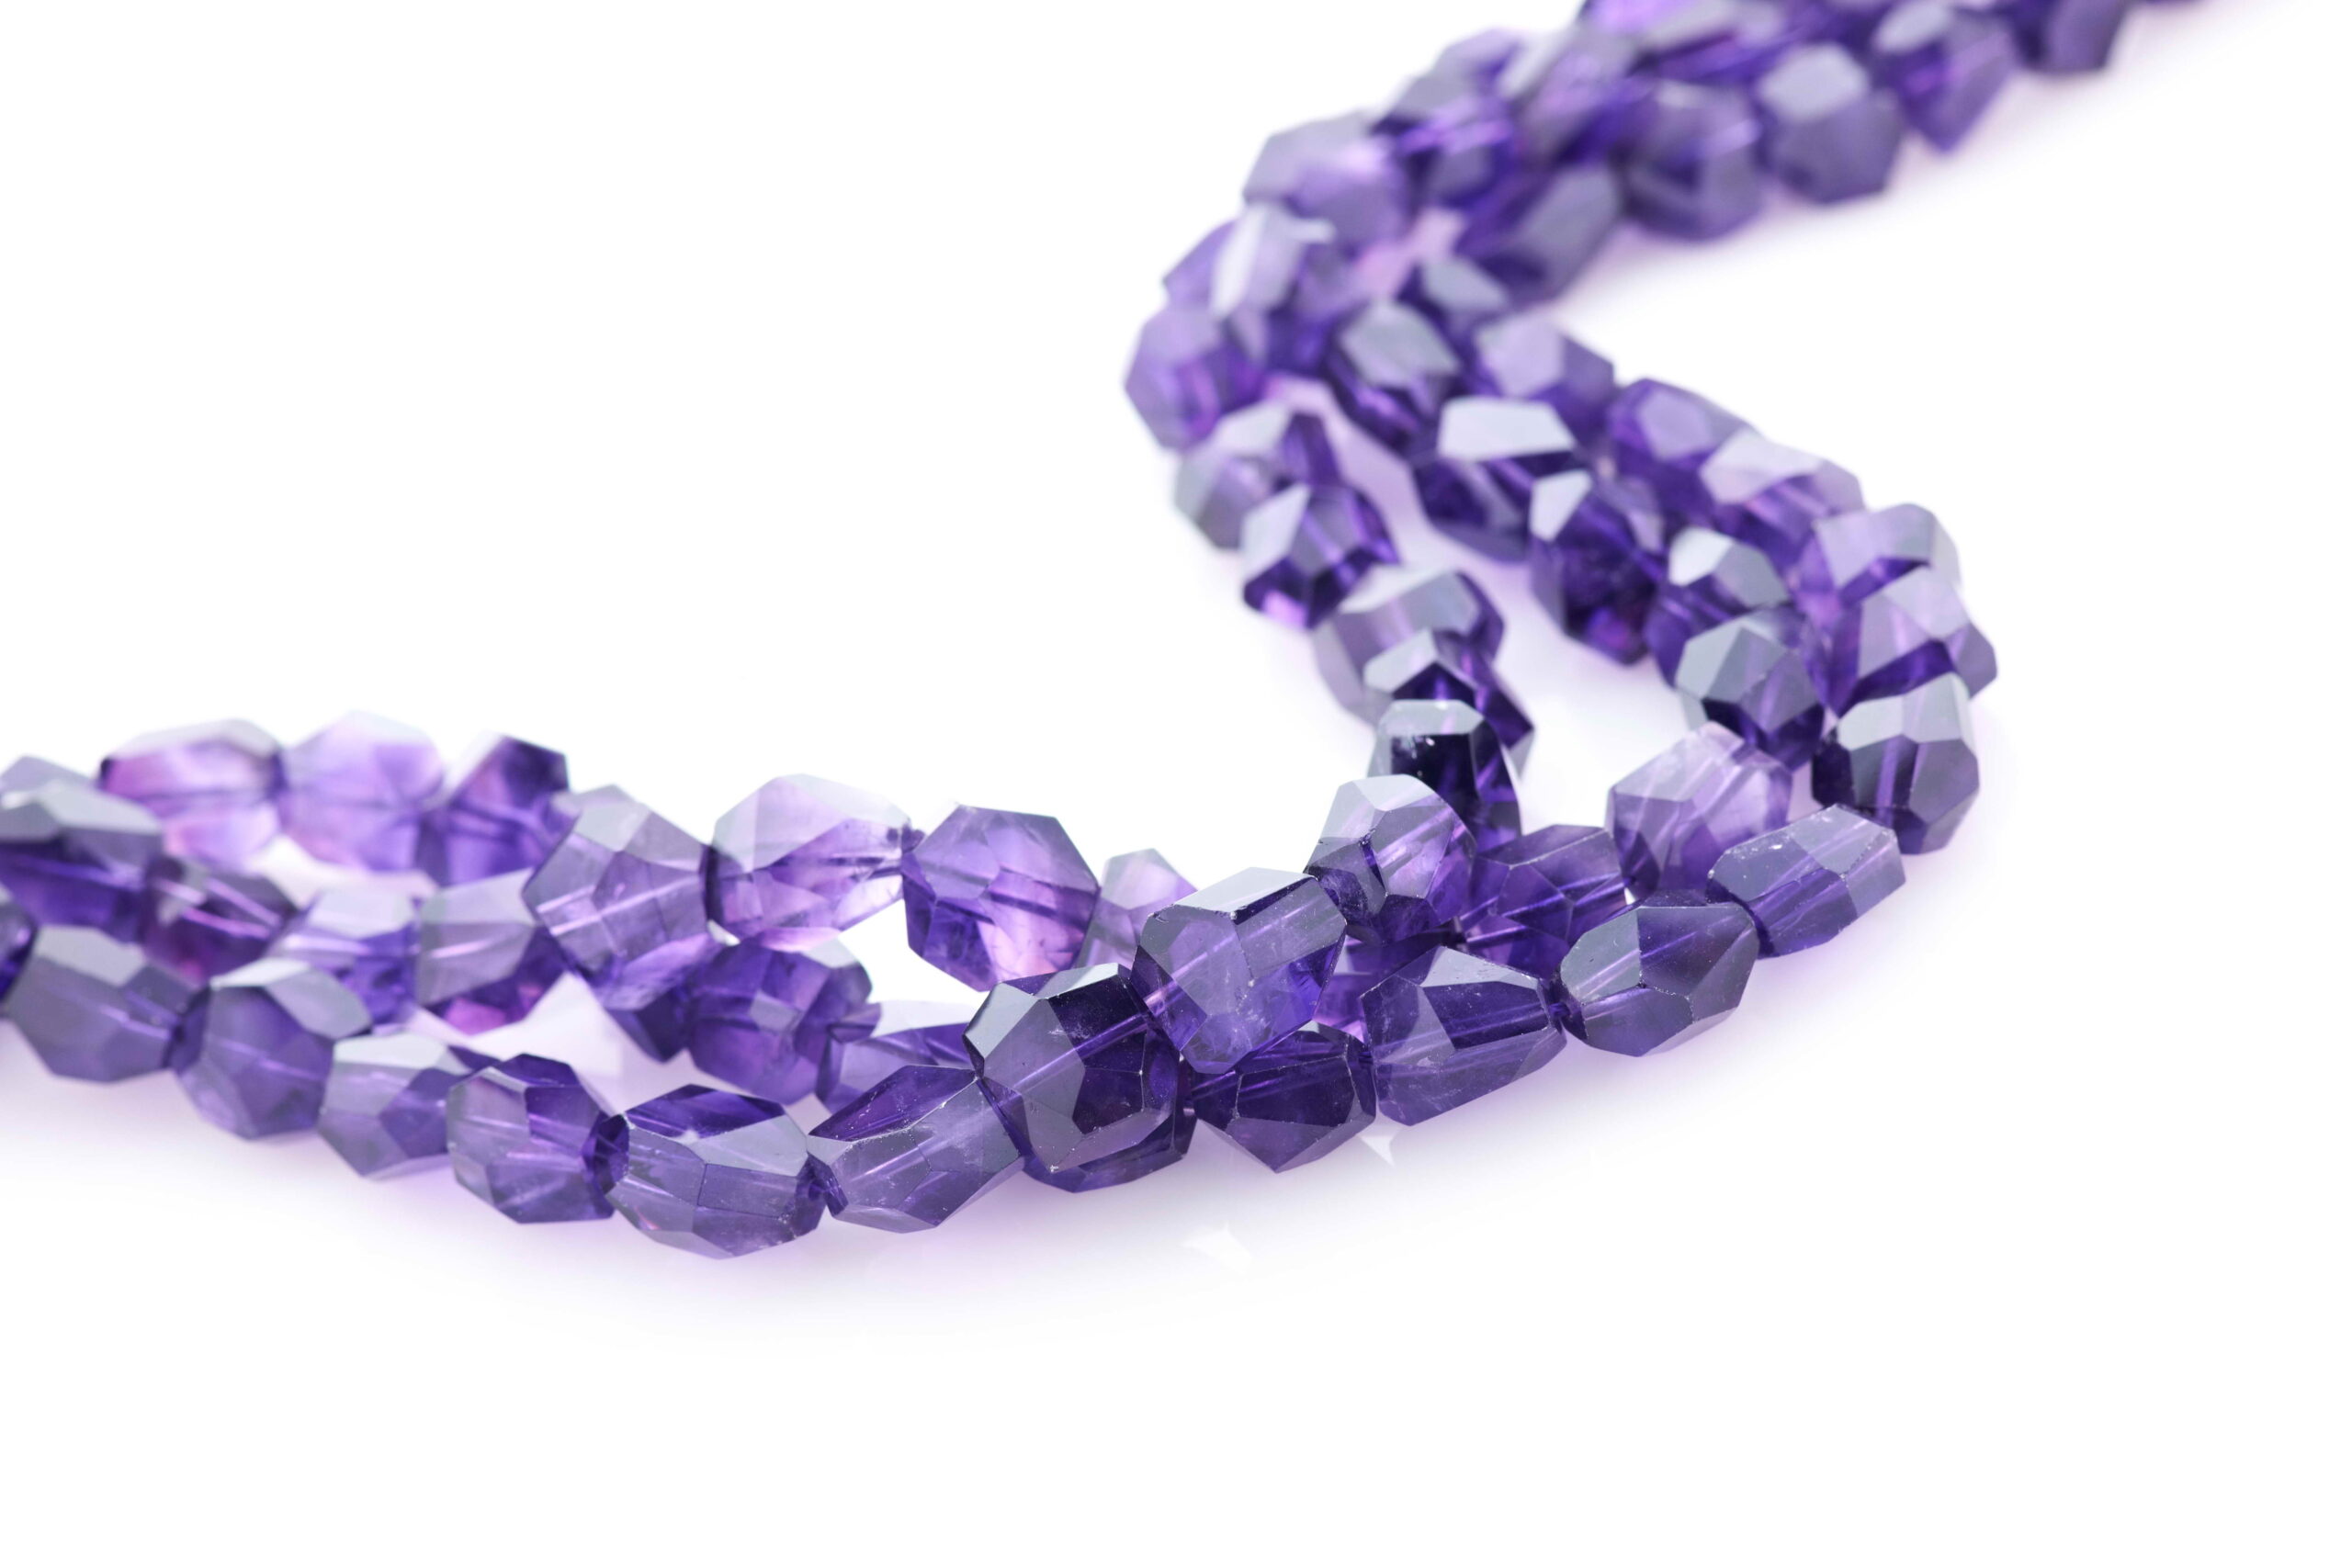 Amethyst: the stone that enchants and protects